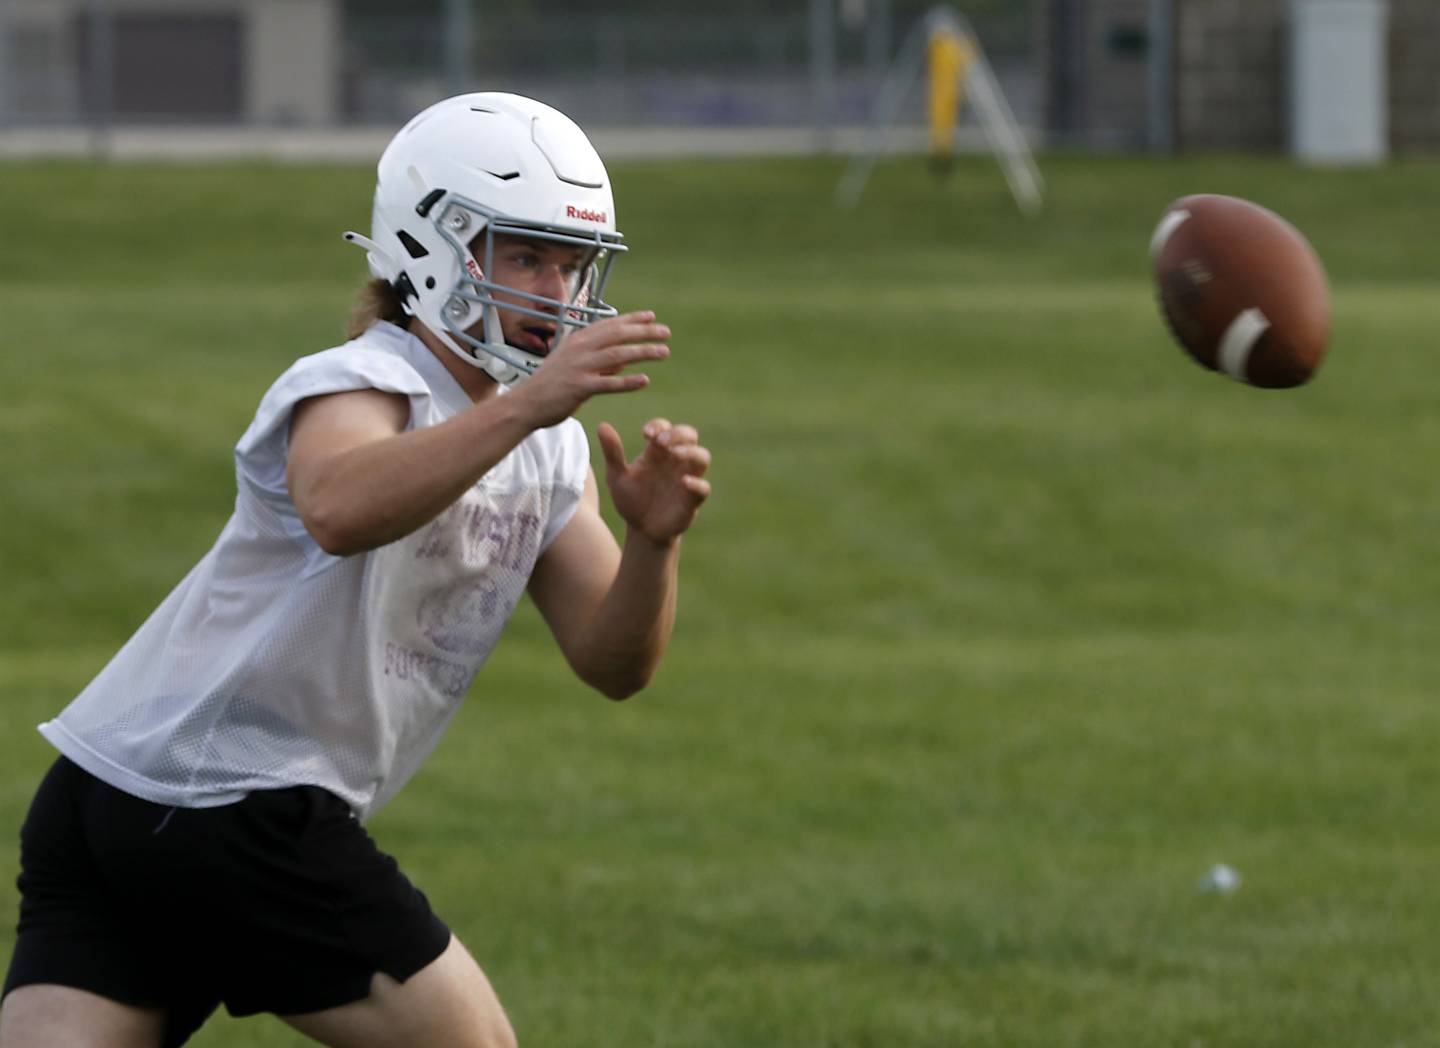 Hampshire’s Cole Klawikowski catches a pitched football during the first day of football practice Monday, August 7, 2023, at the Hampshire High School.